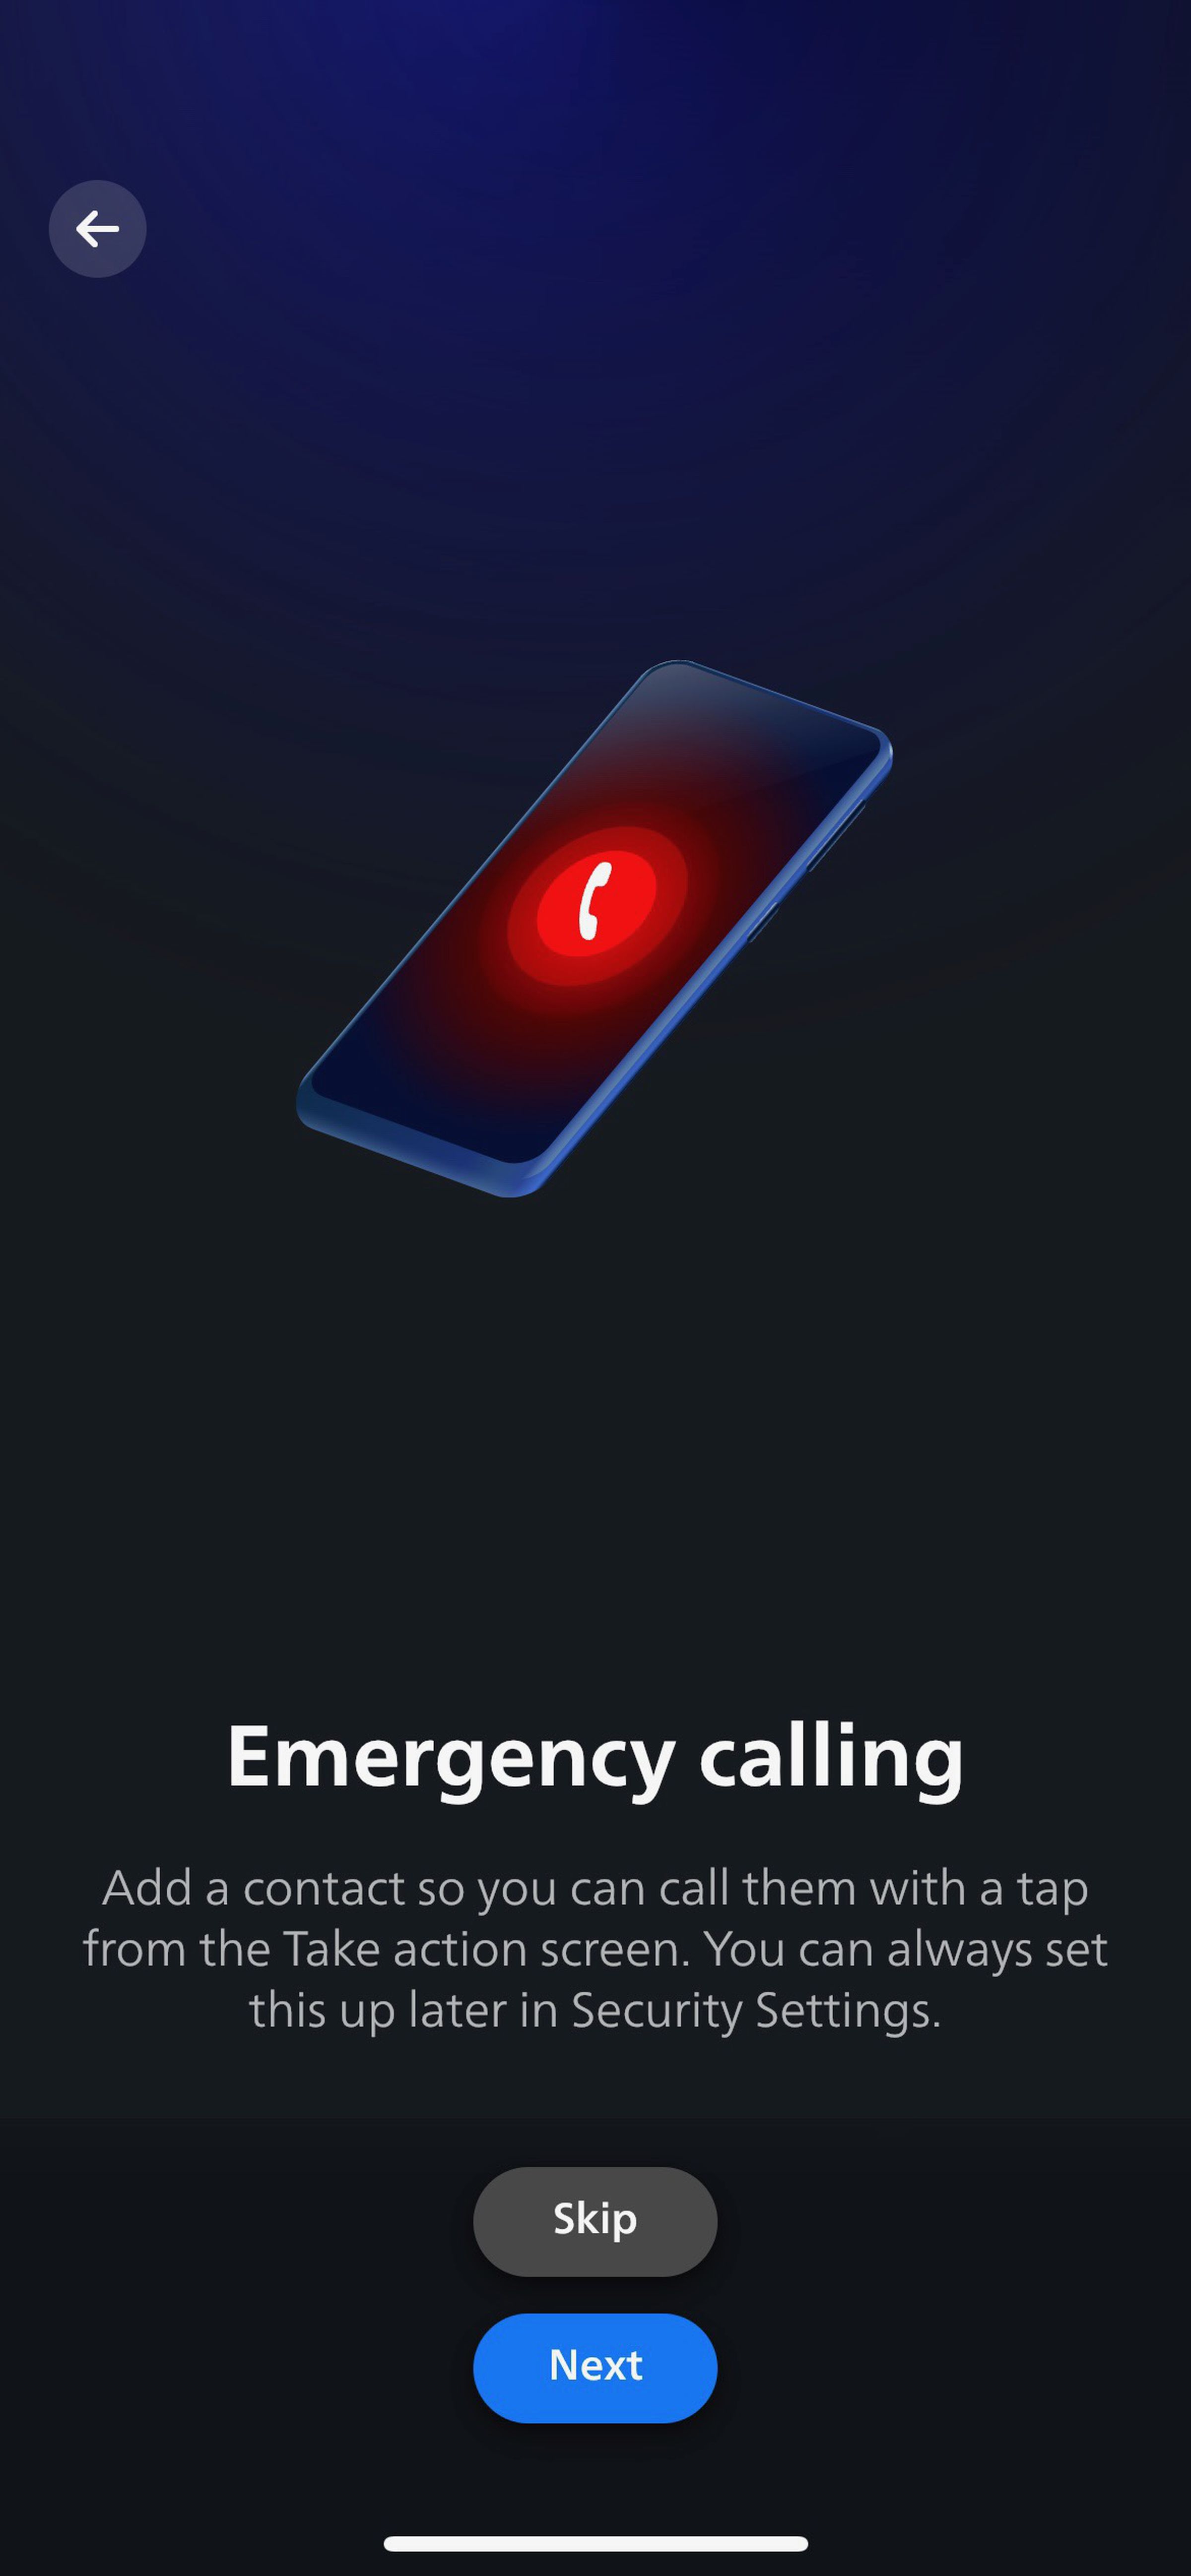 <em>Lastly, you can select an emergency contact to call directly from the Hue app.</em>